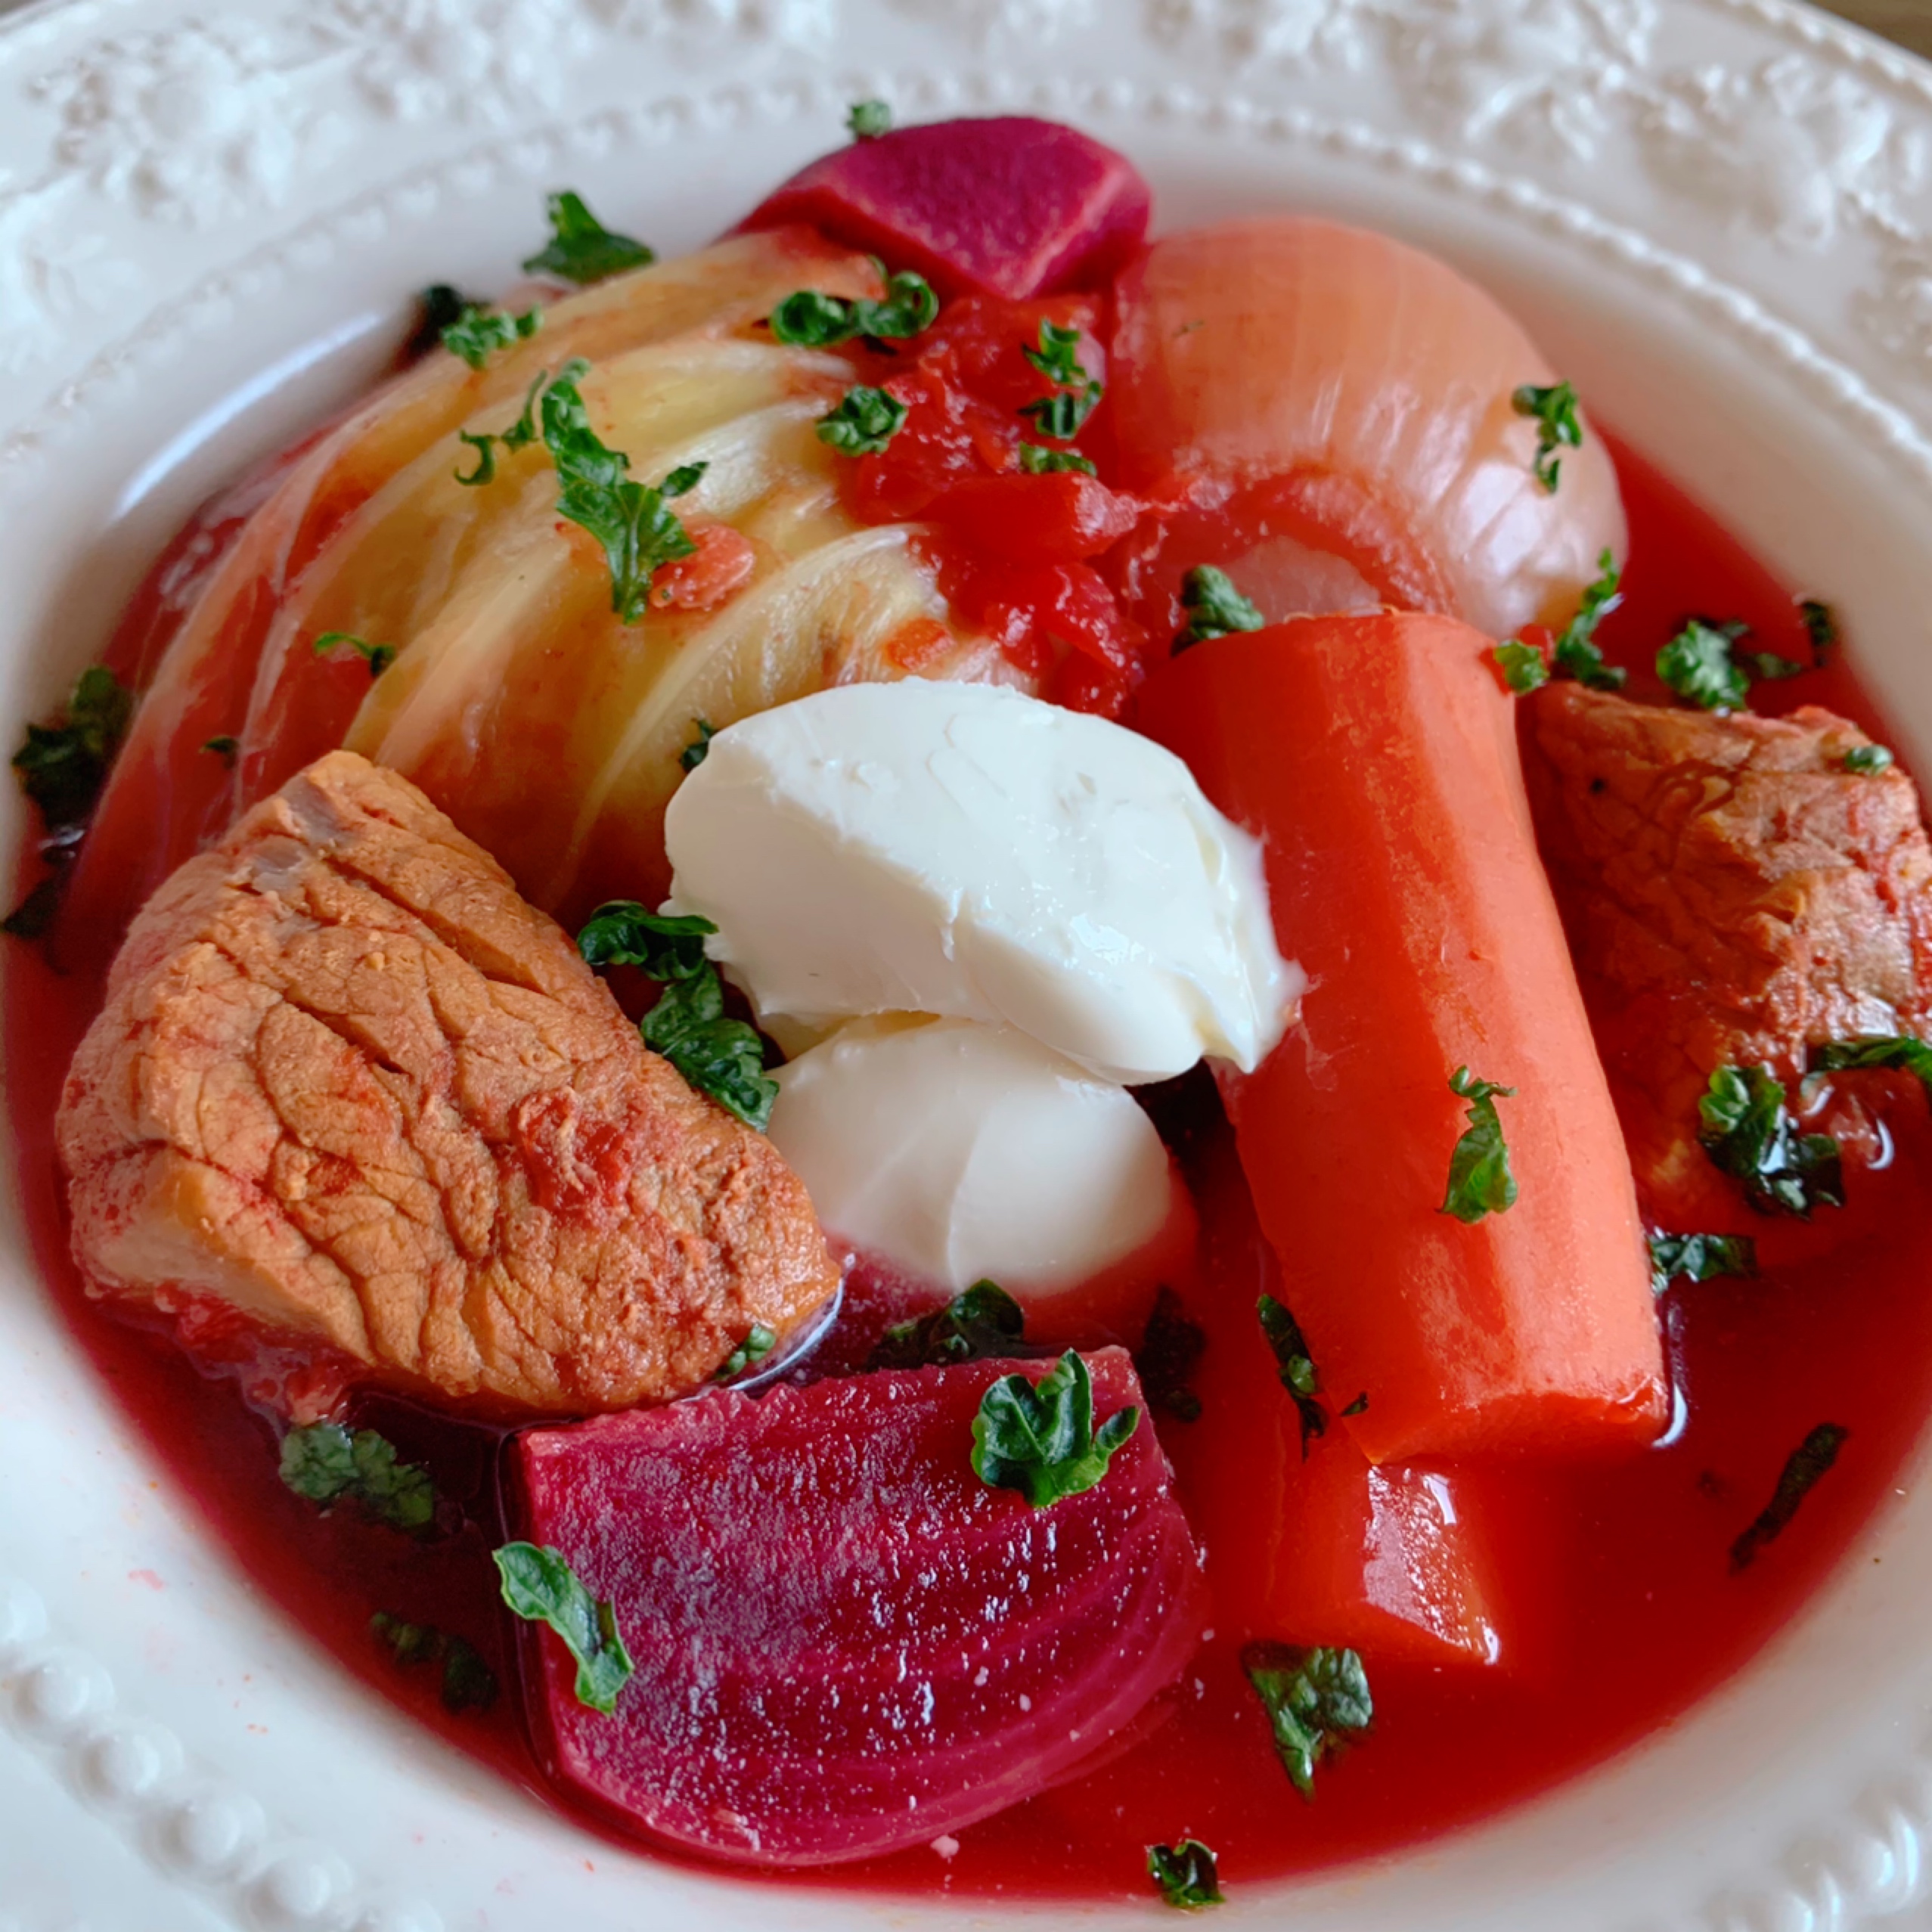 A soup made with stewed beets, cabbage, and beef and seasoned with consommé.